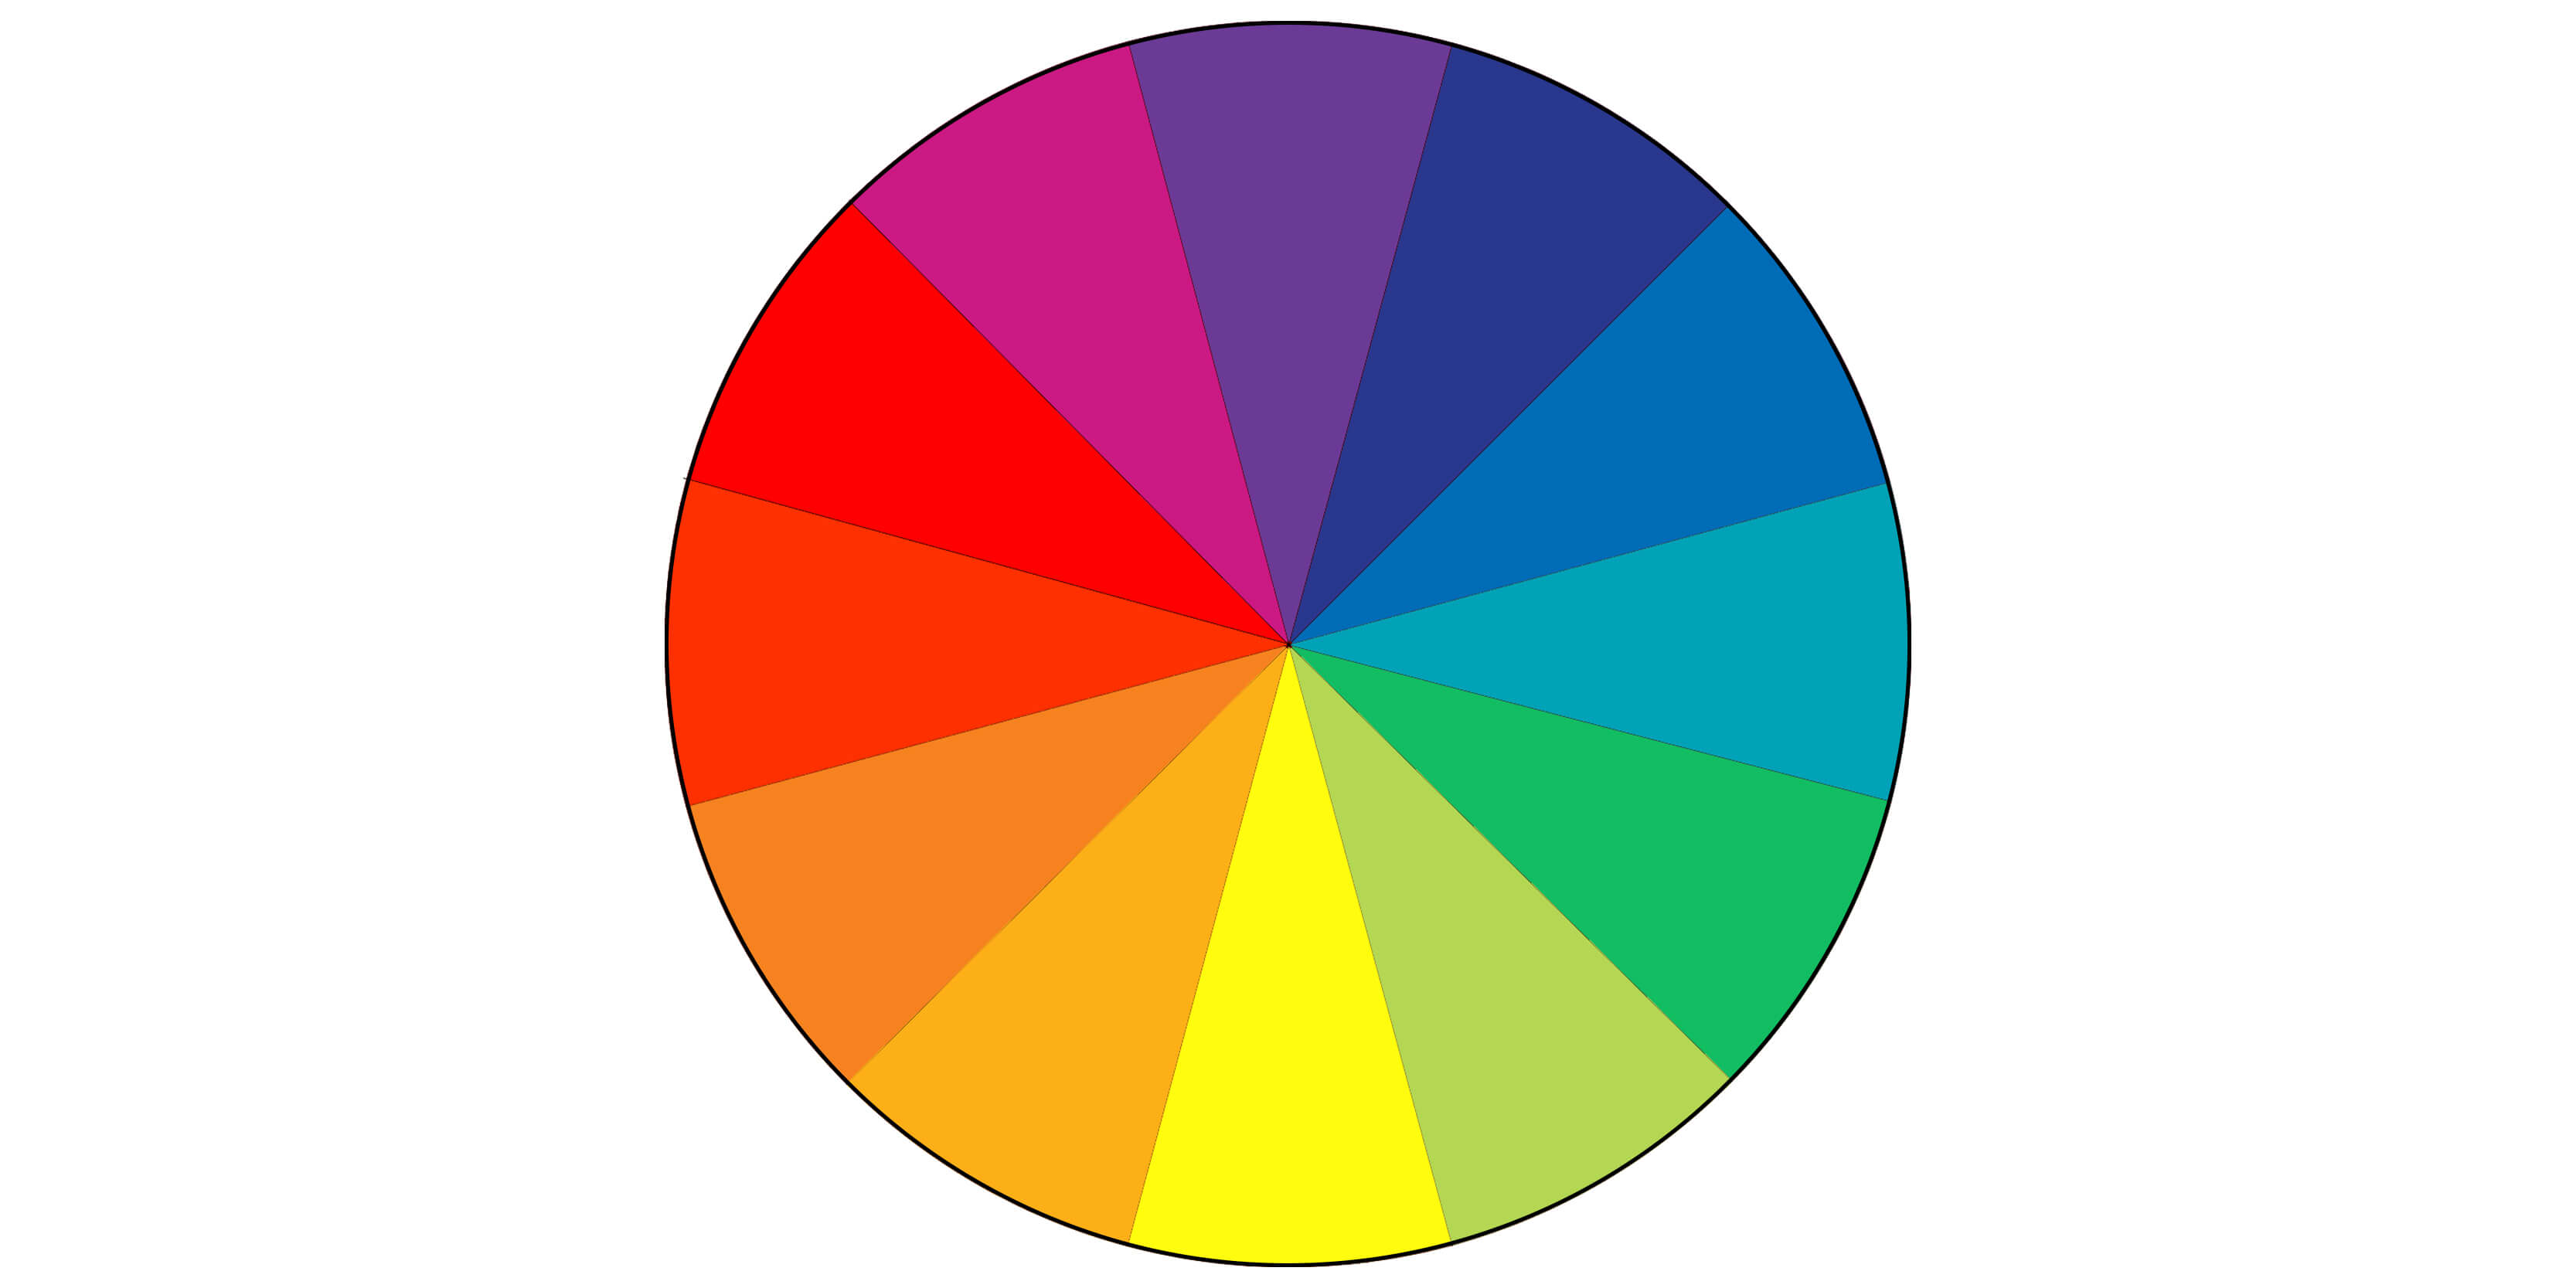 Colour wheel - How to create a perfect modern color scheme for your website - Image